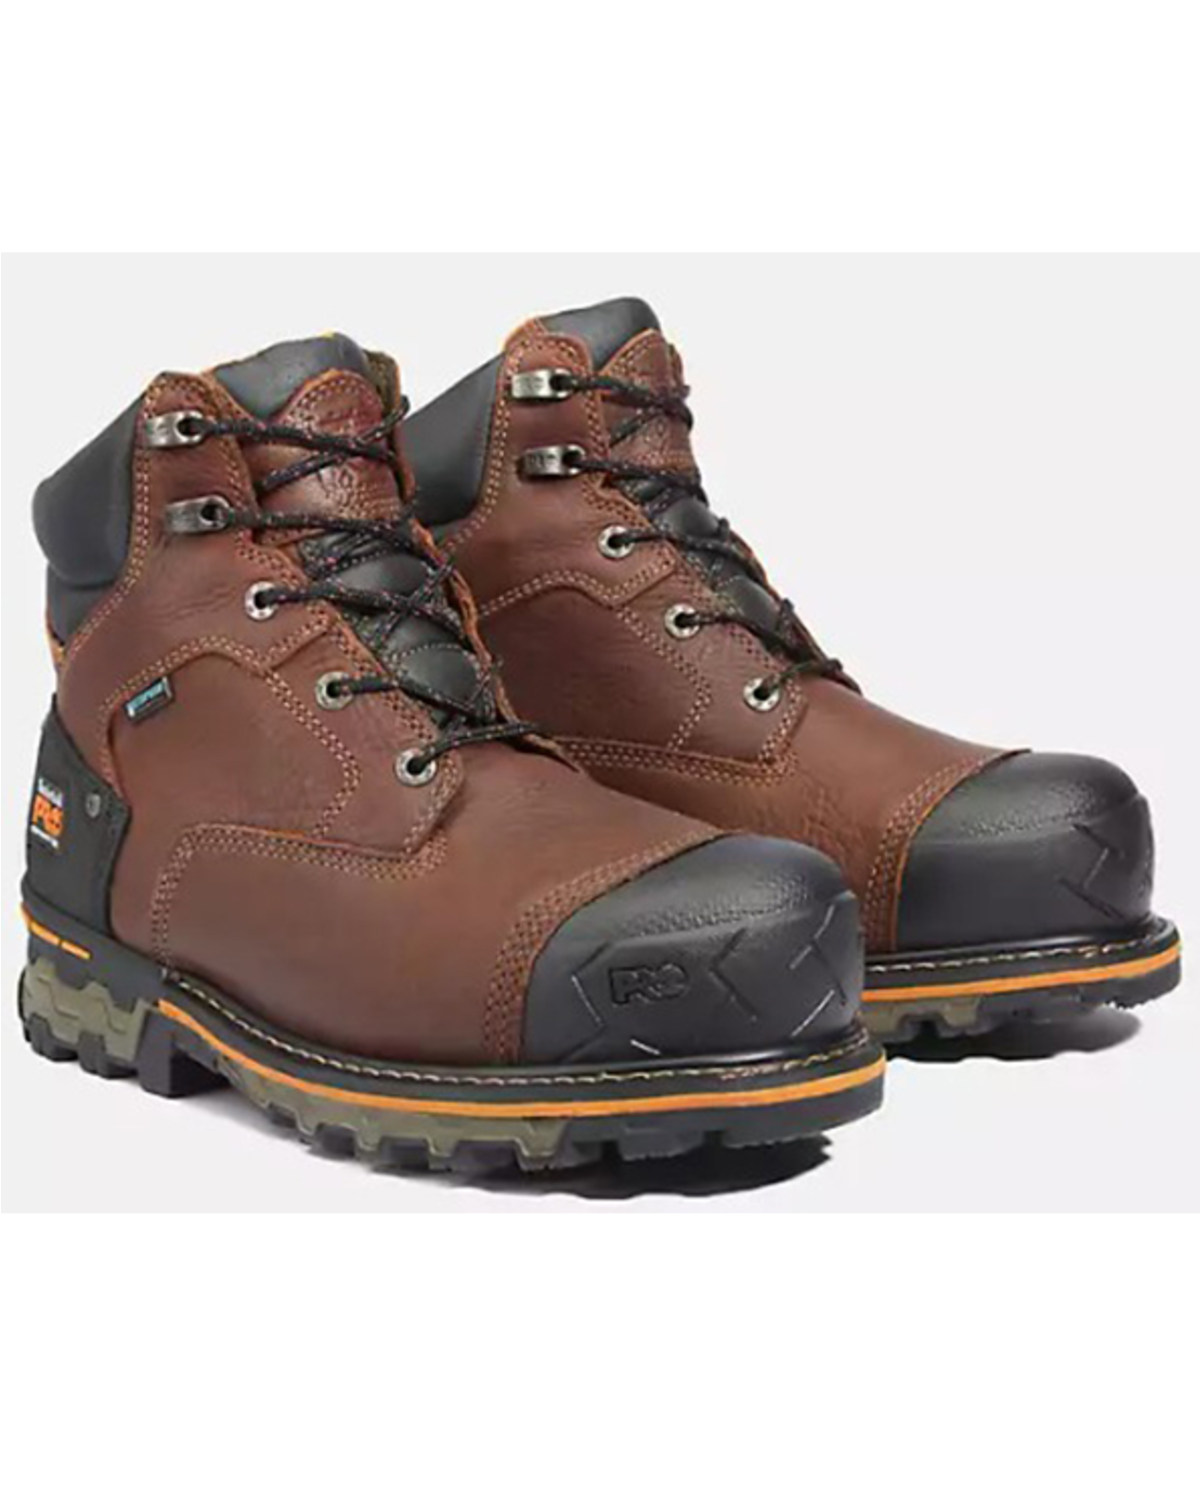 timberland insulated work boots